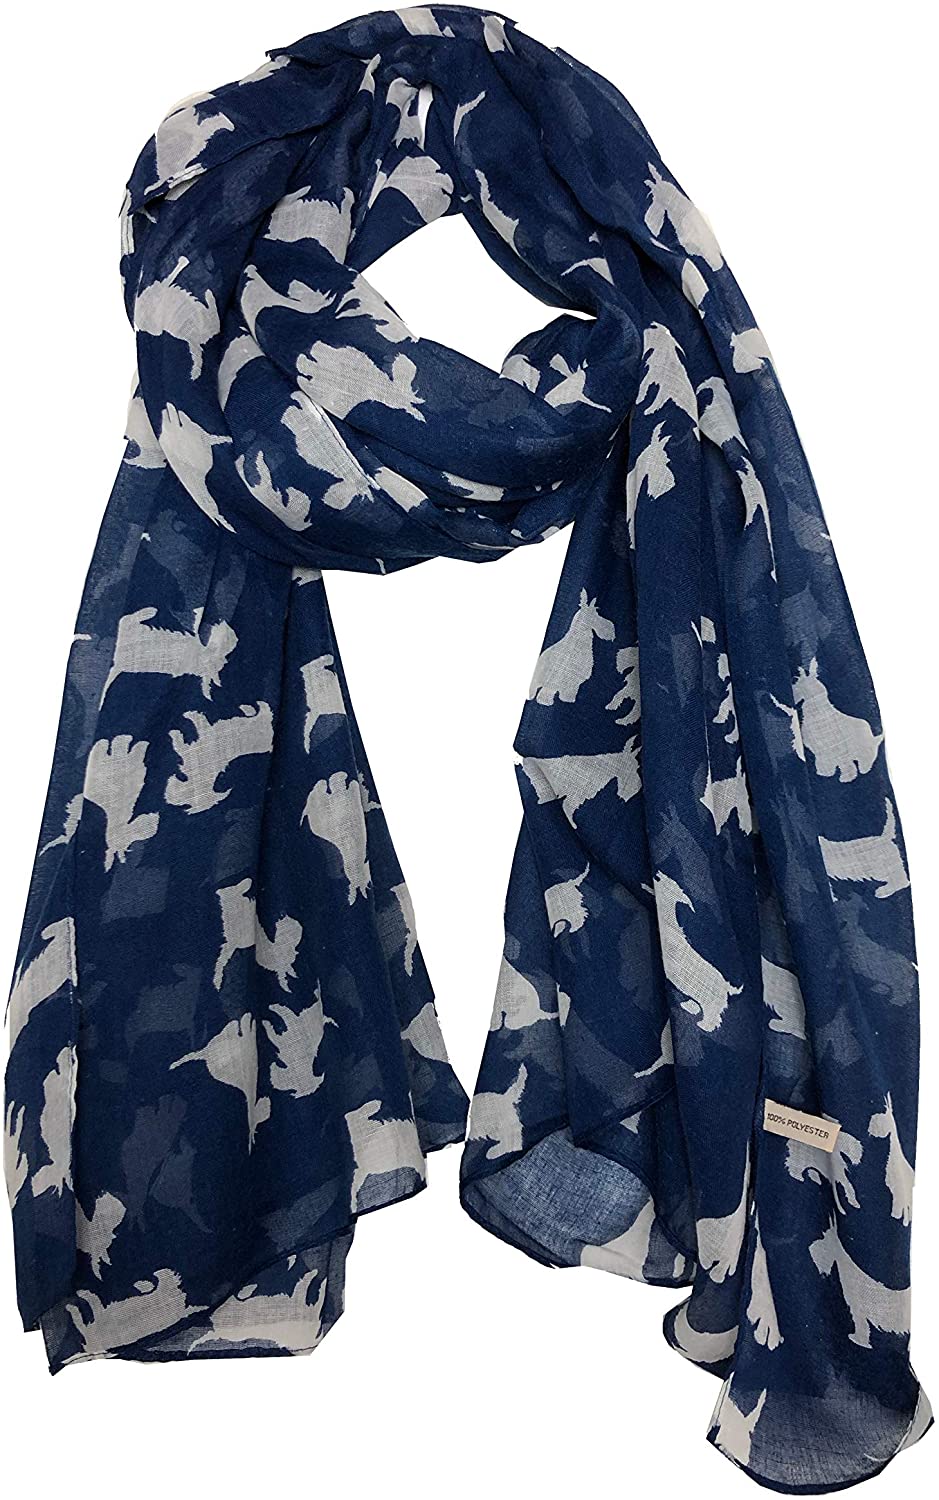 Pamper Yourself Now Blue with White Scottie Dogs, Long Scarf, Soft Ladies Fashion London